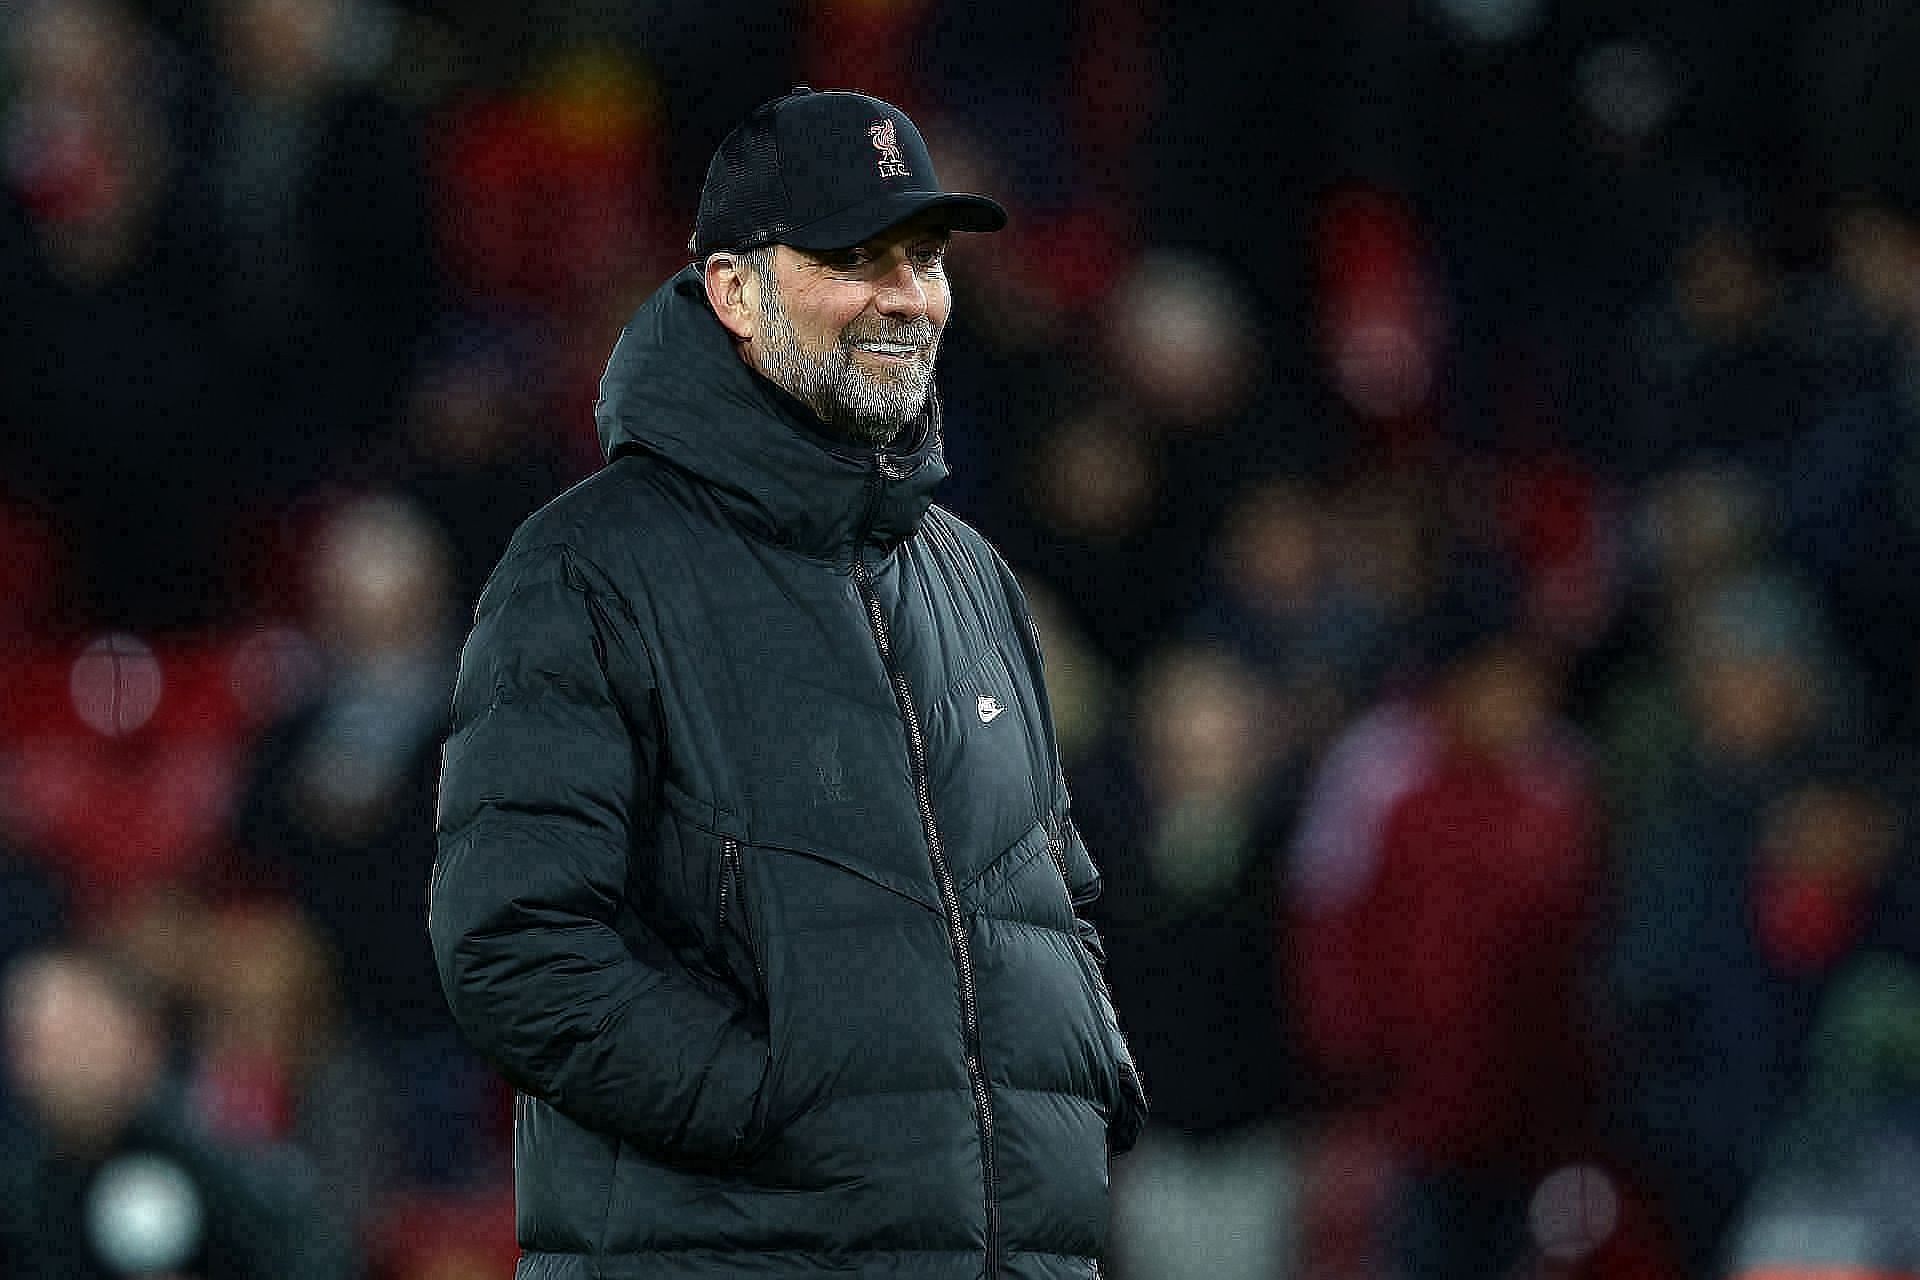 Liverpool Transfer News Roundup: Reds target preparing for a move to England, Jurgen Klopp provides an update on the squad ahead of Brighton clash, and more – March 11, 2022